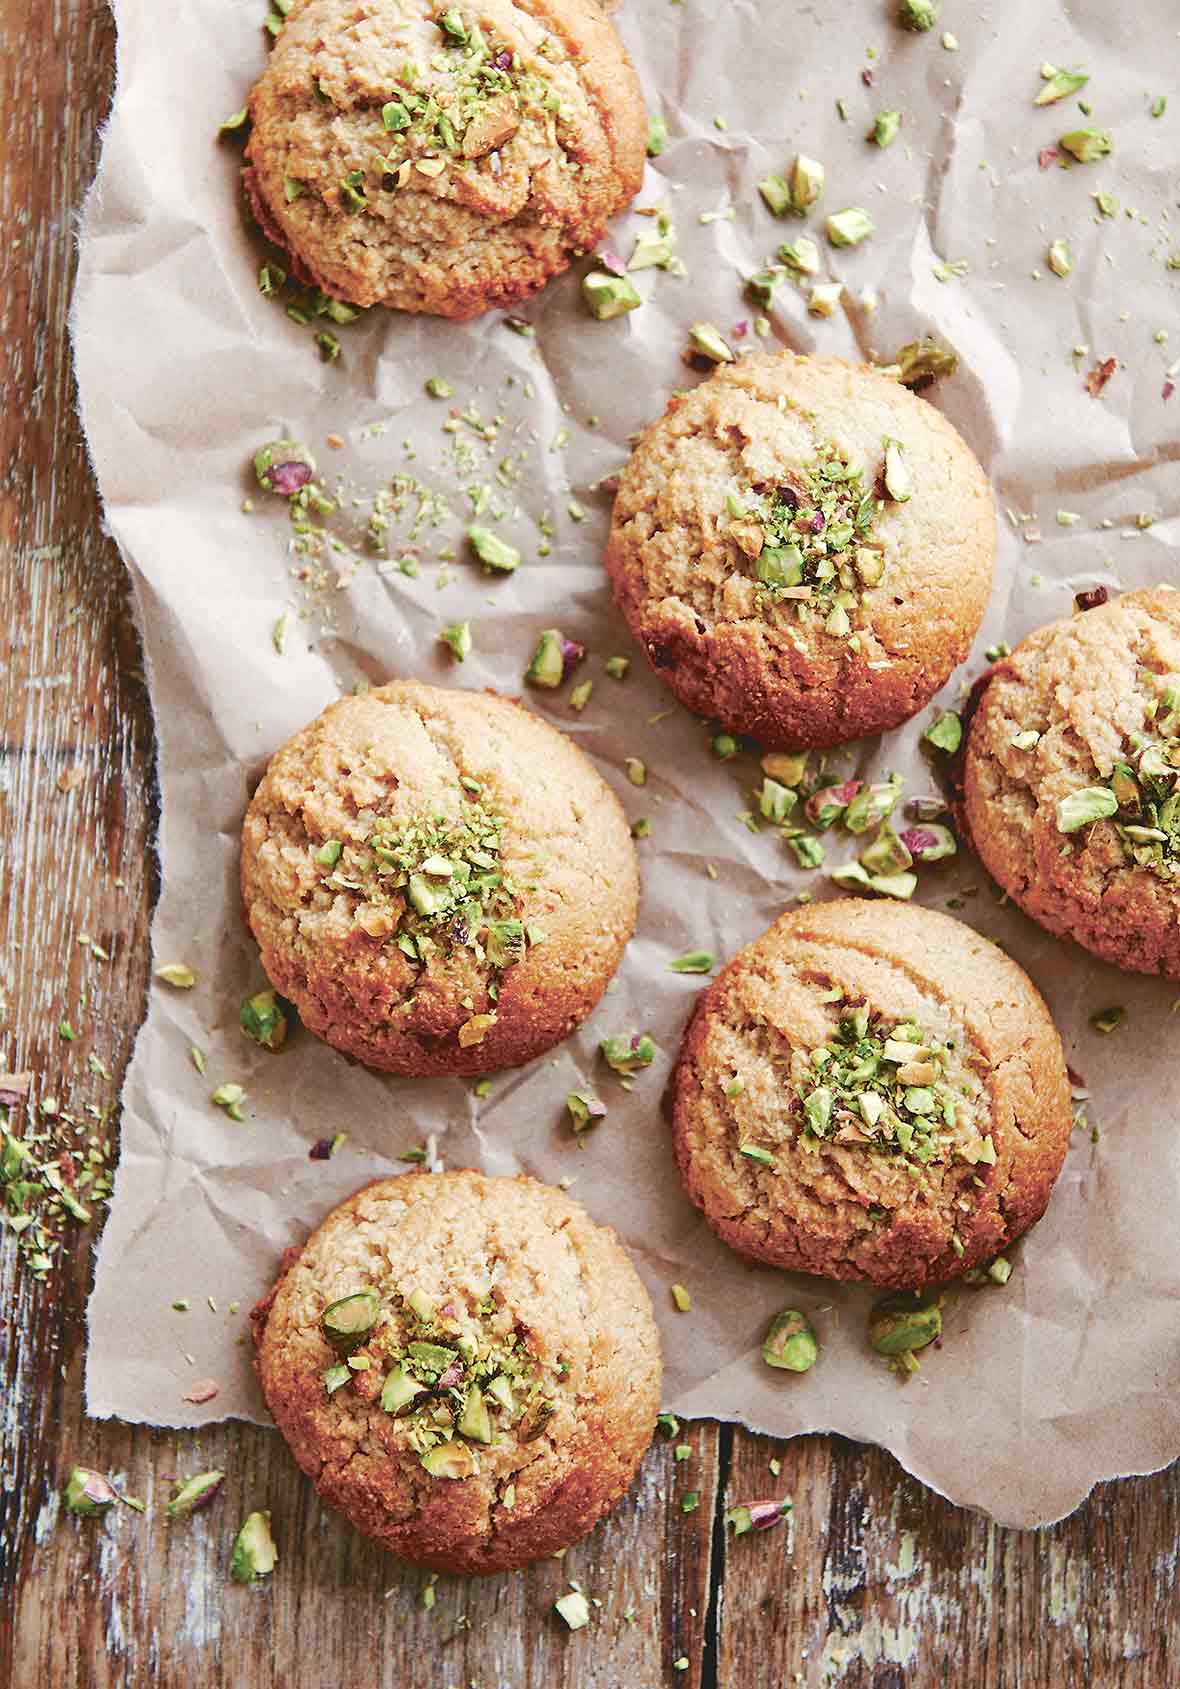 Six tahini cookies on a piece of parchment with chopped pistachios on the cookies and on the parchment.